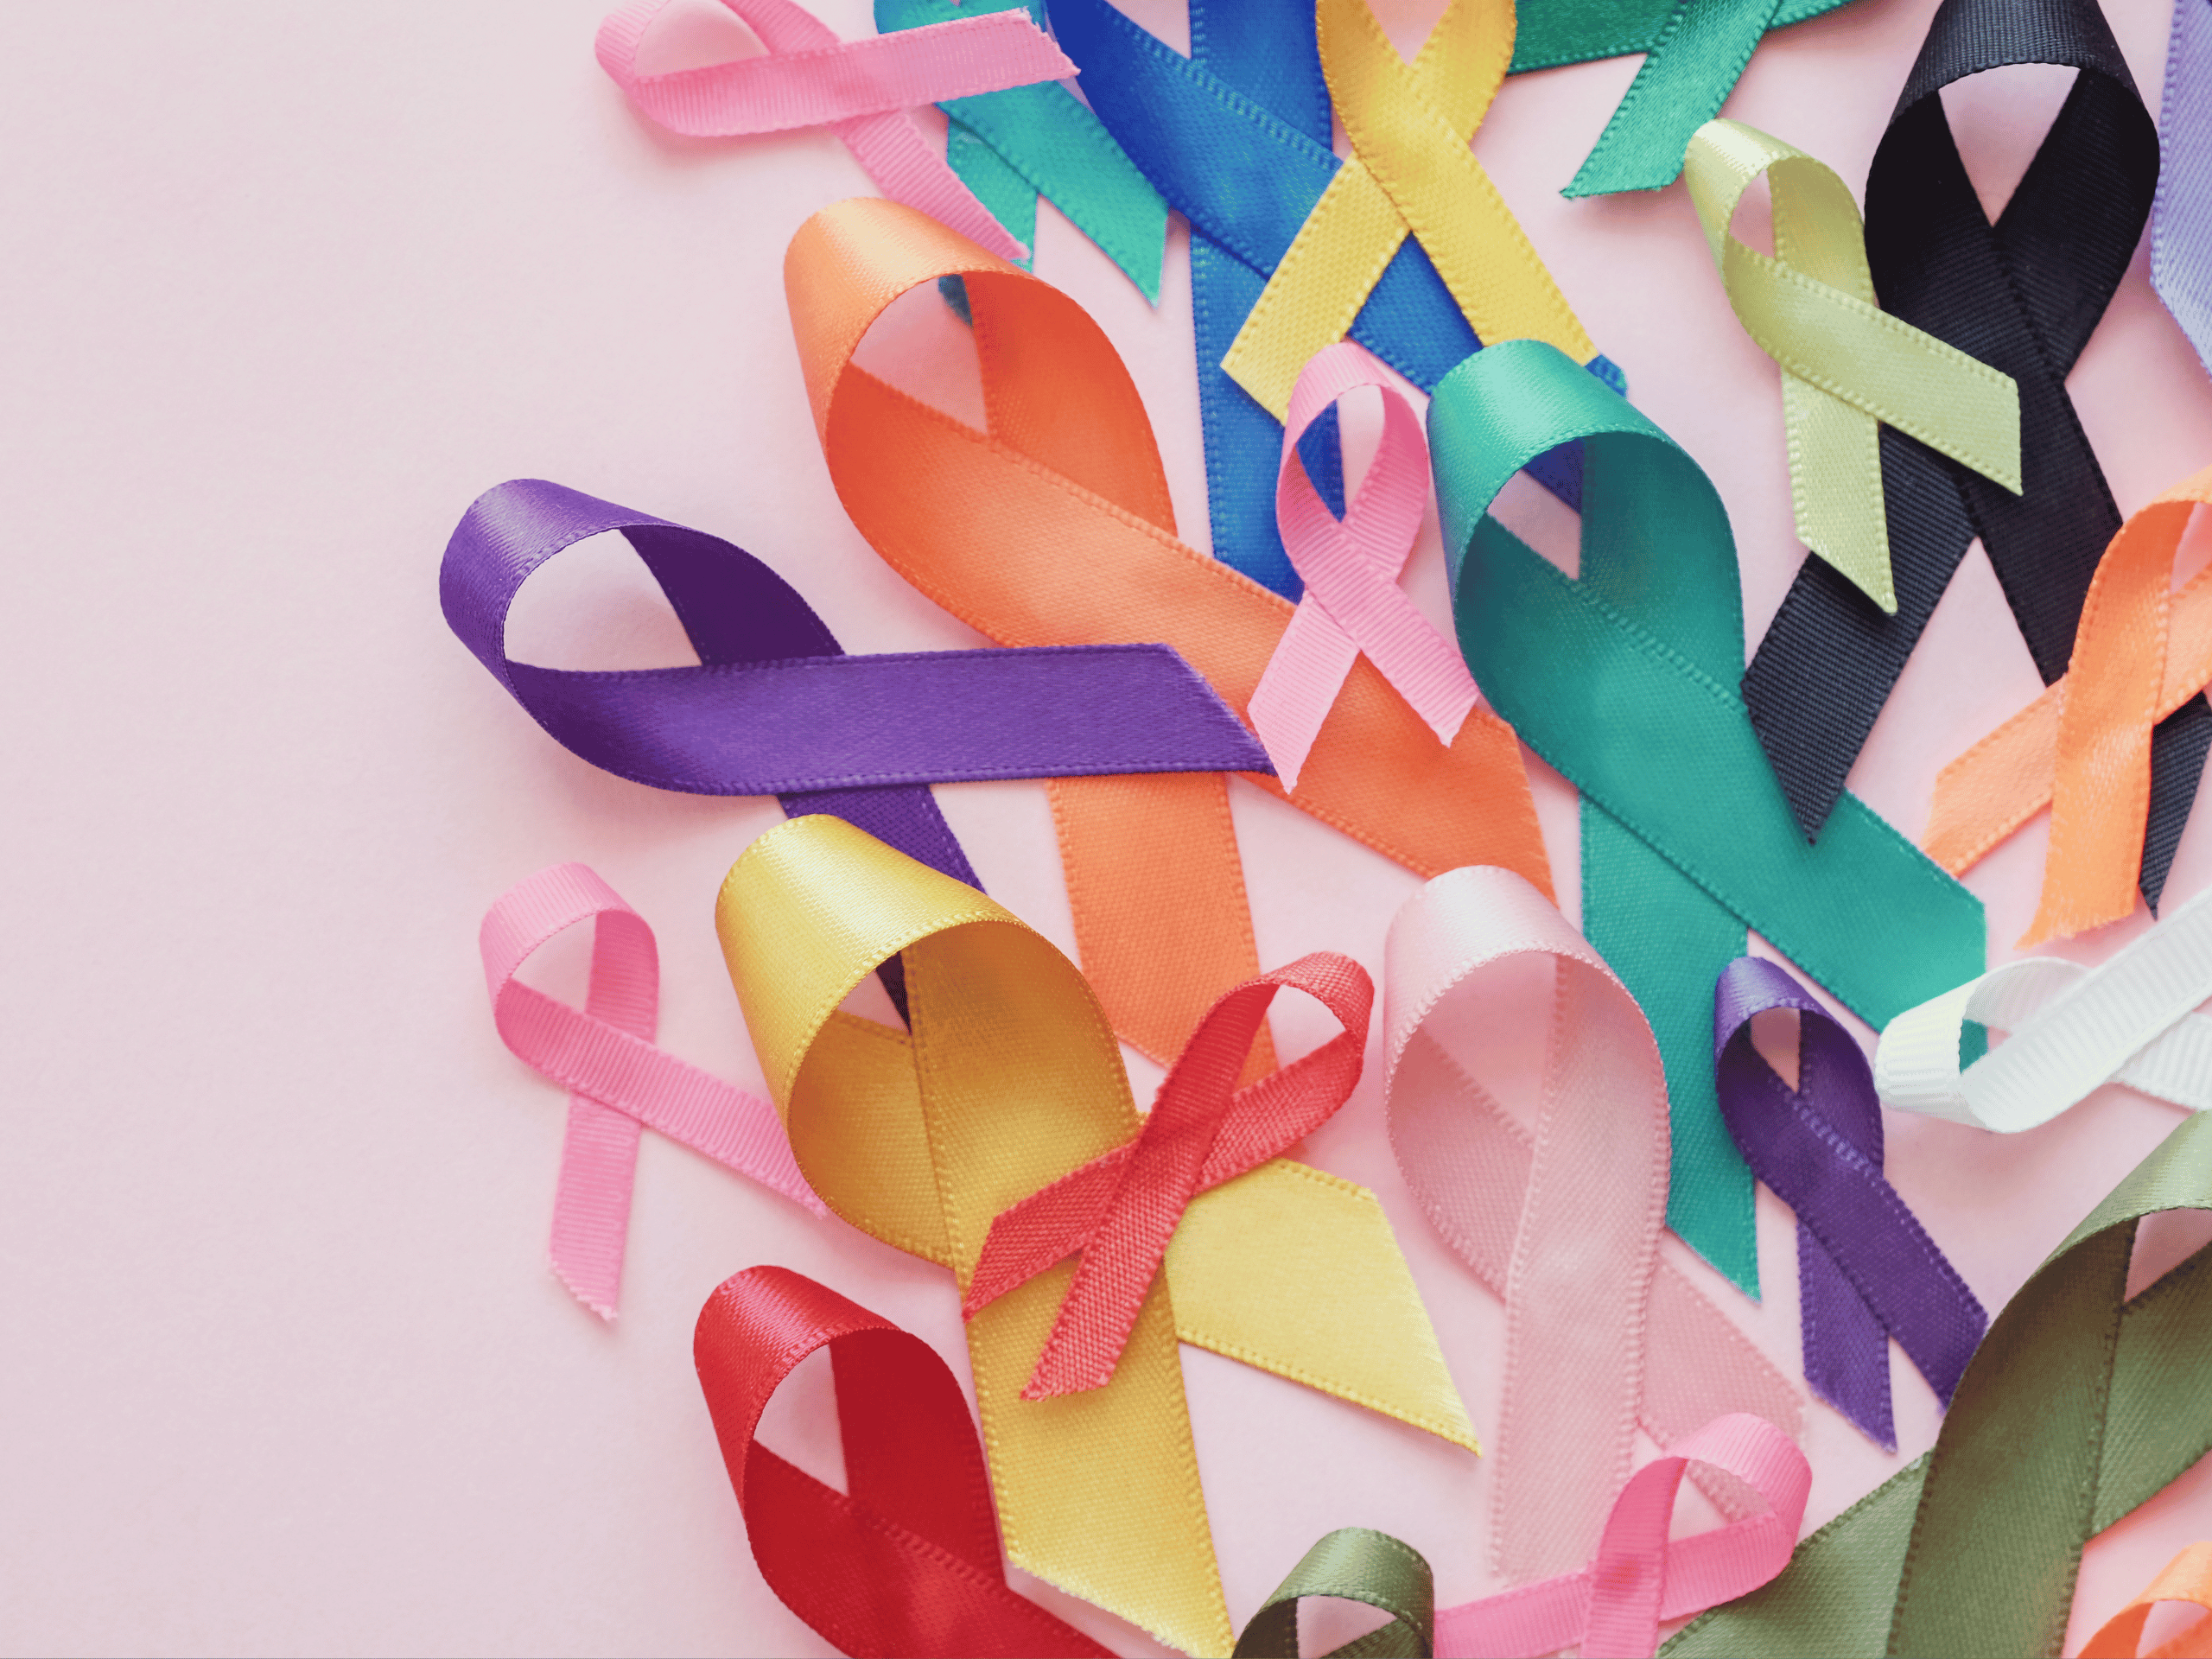 Numerous multicolored cancer awareness ribbons on a pink background